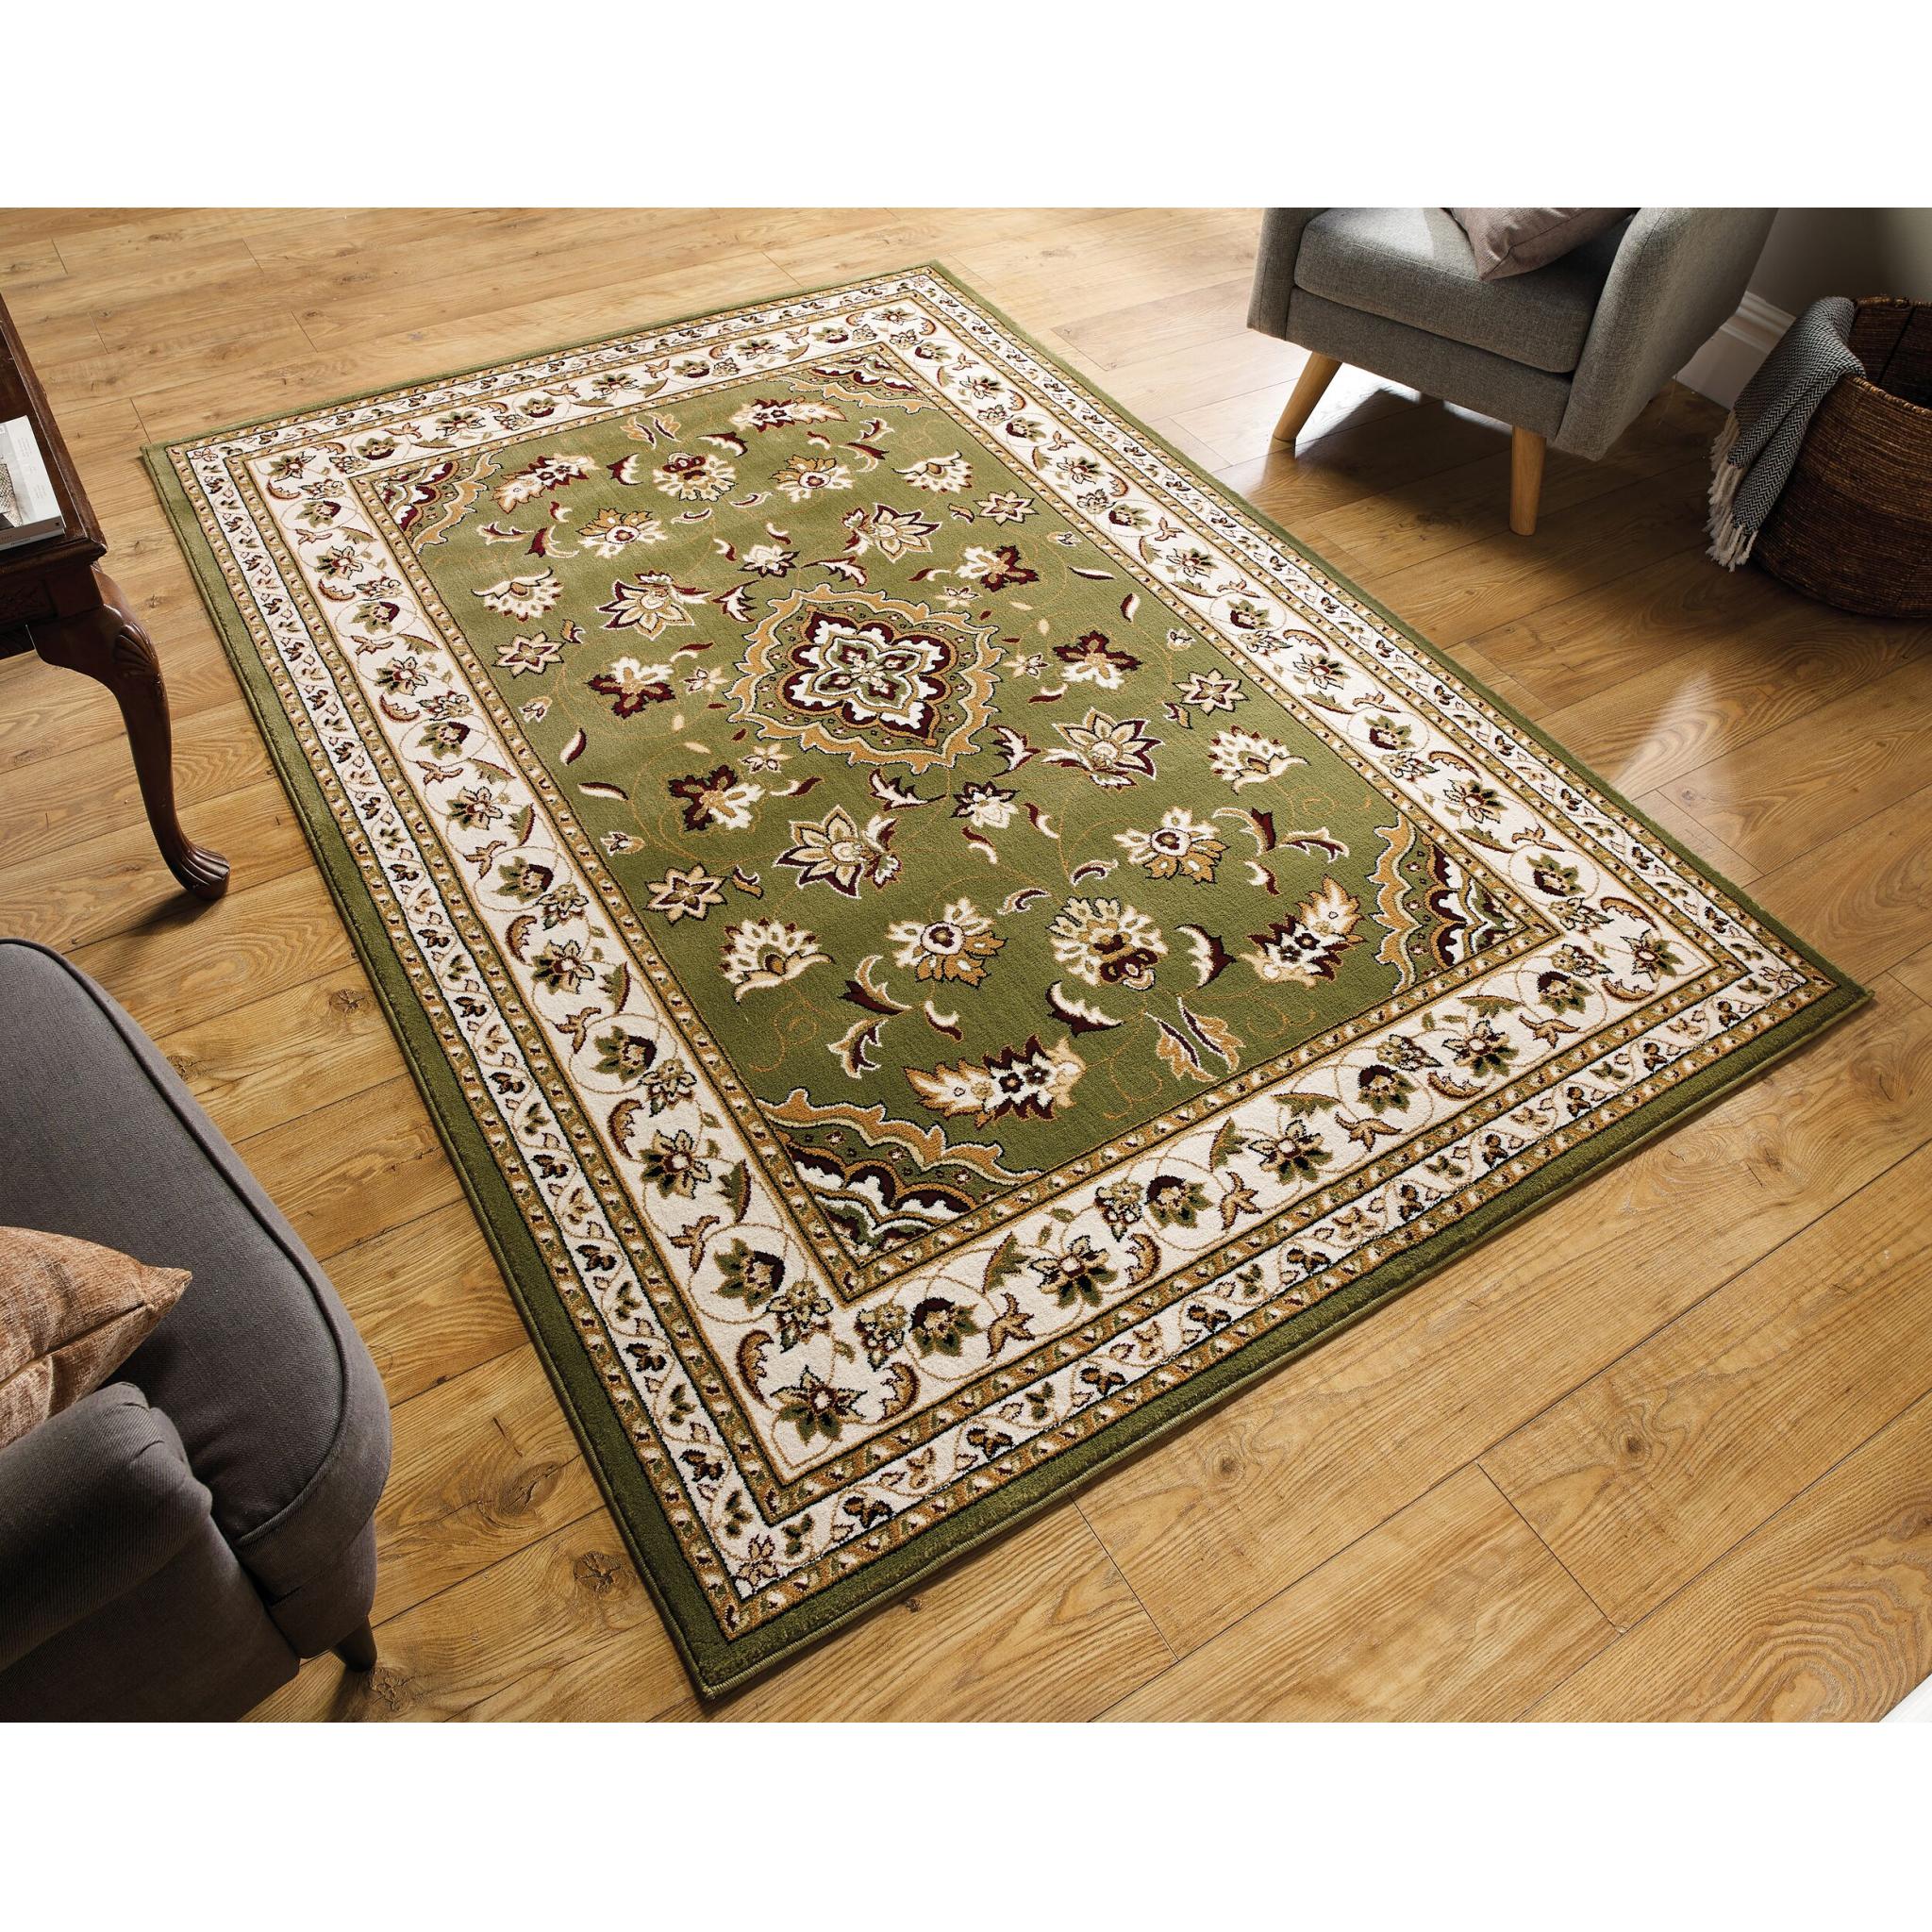 QUALITY TRADITIONAL CLASSIC ORIENTAL BEIGE GREEN RED RUG RUNNER ROUND CARPET 